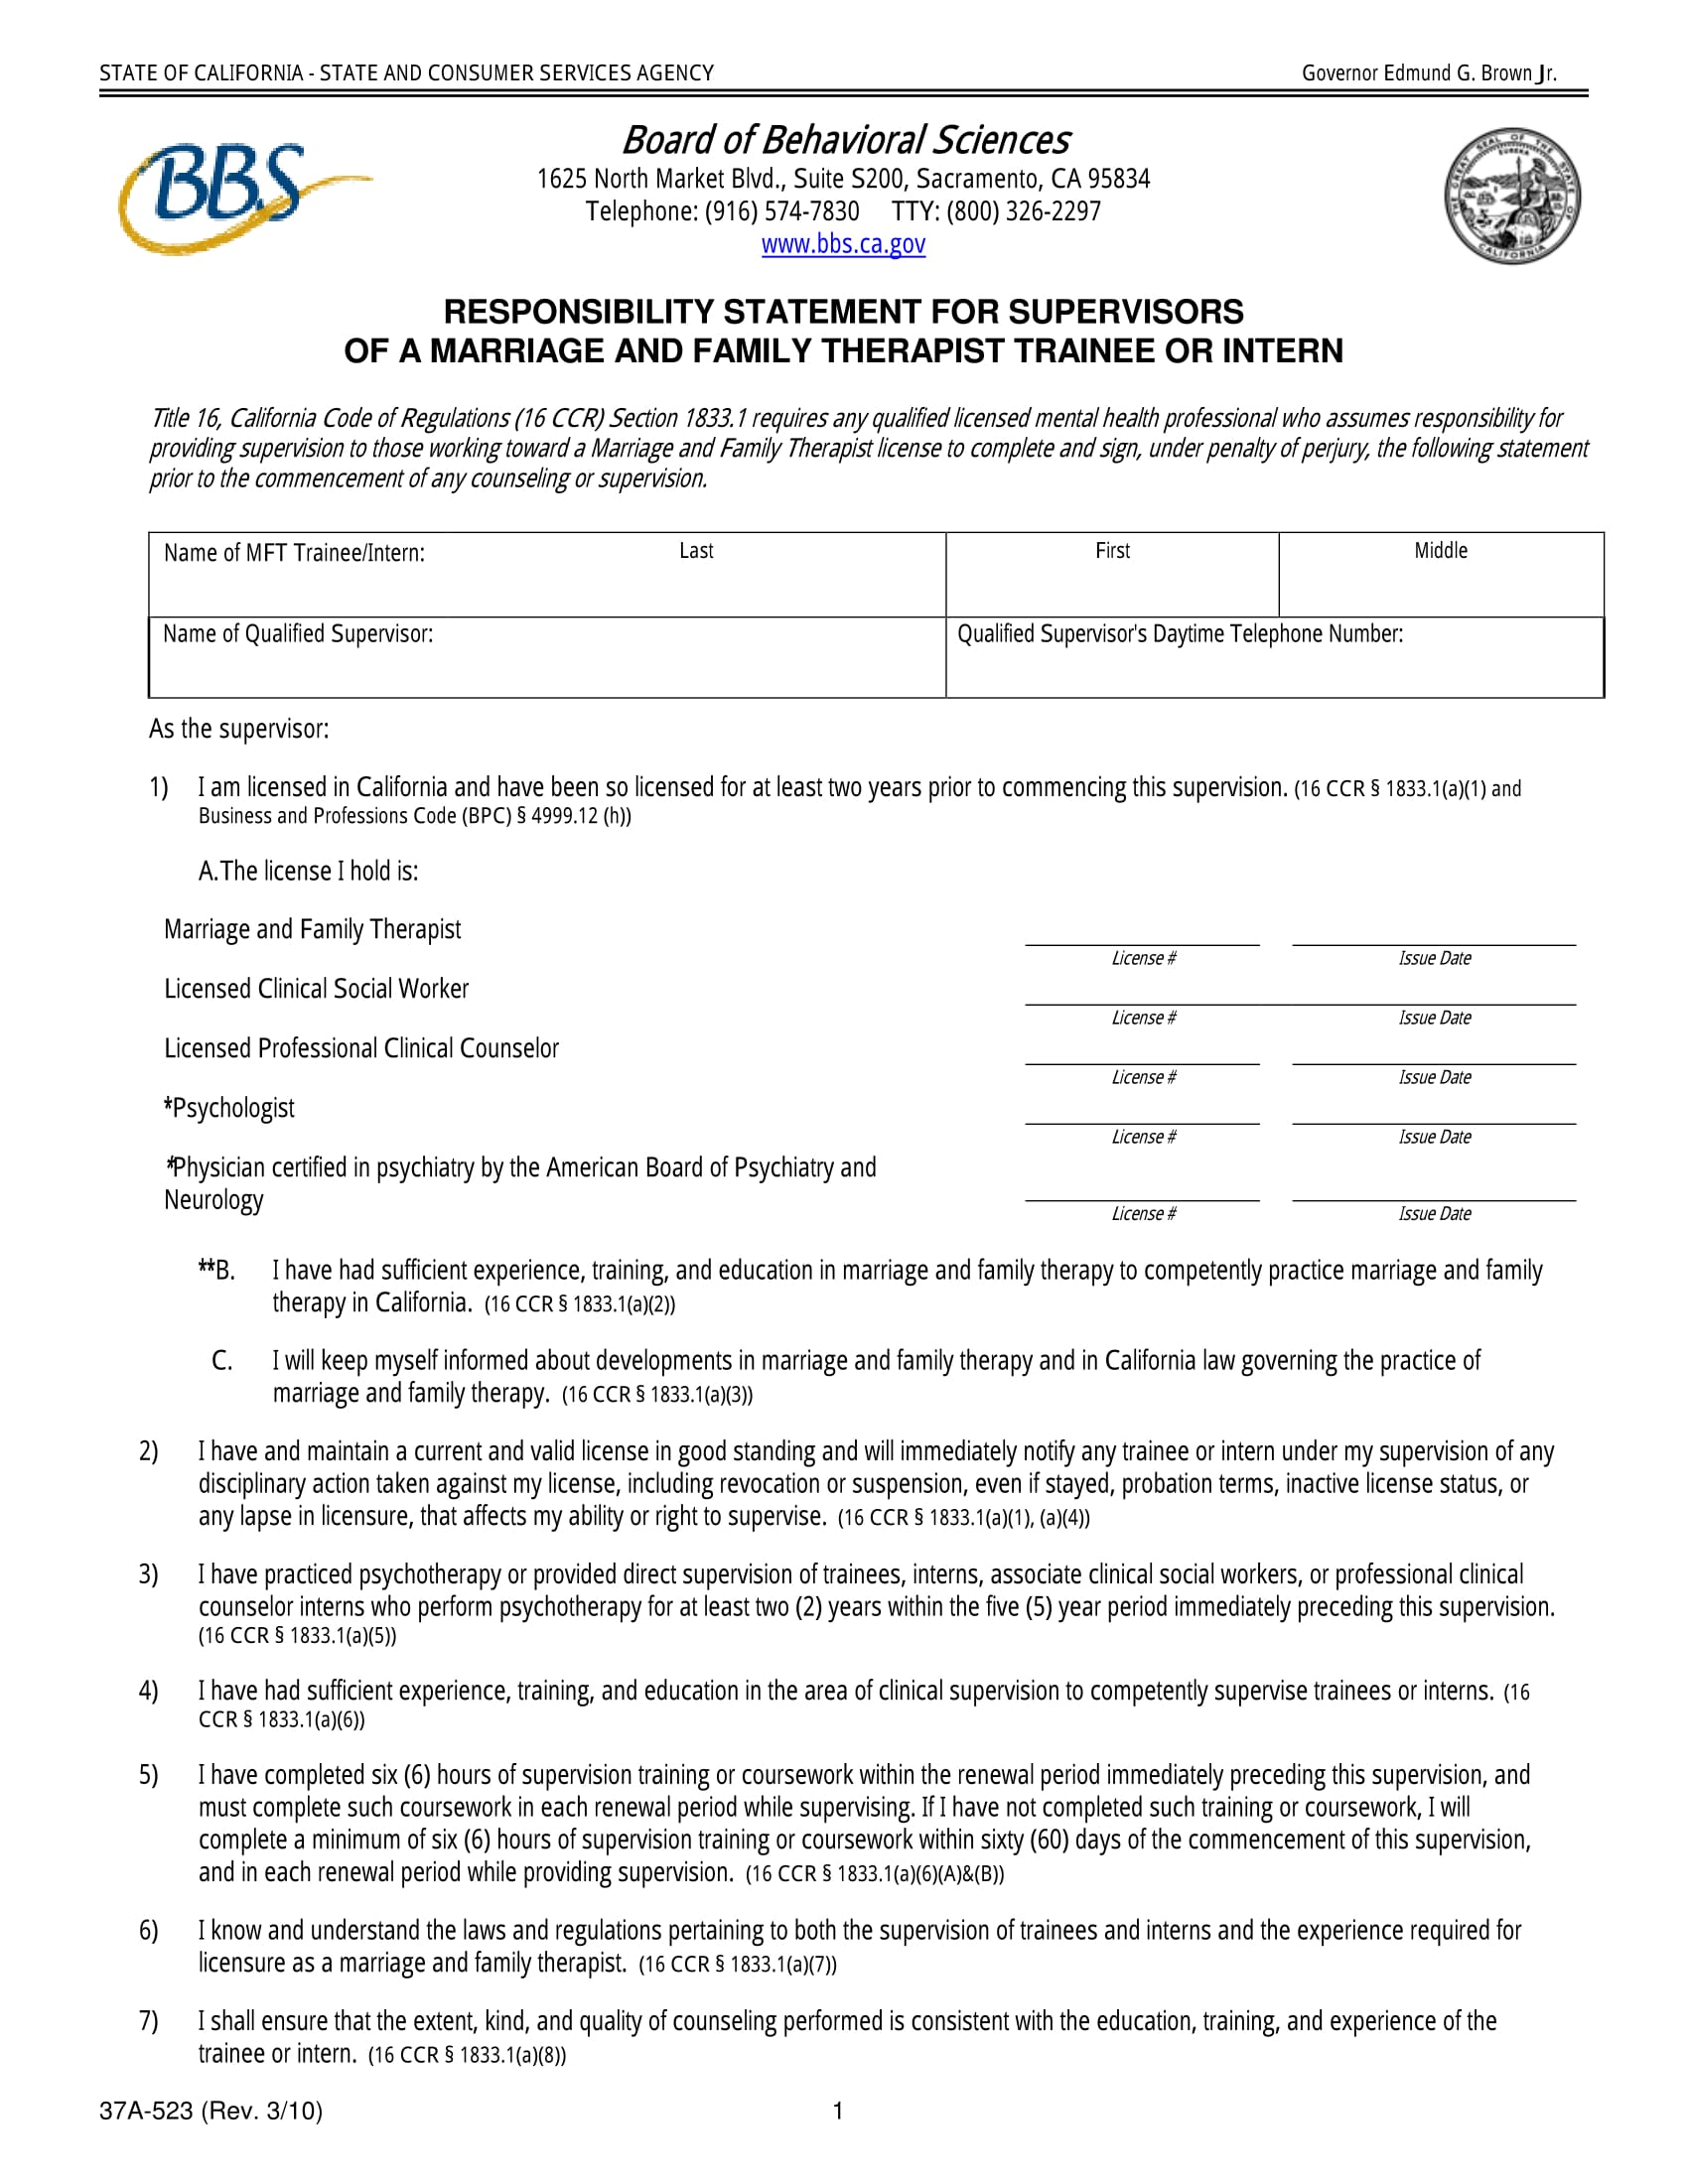 couneling responsibility statement form 1